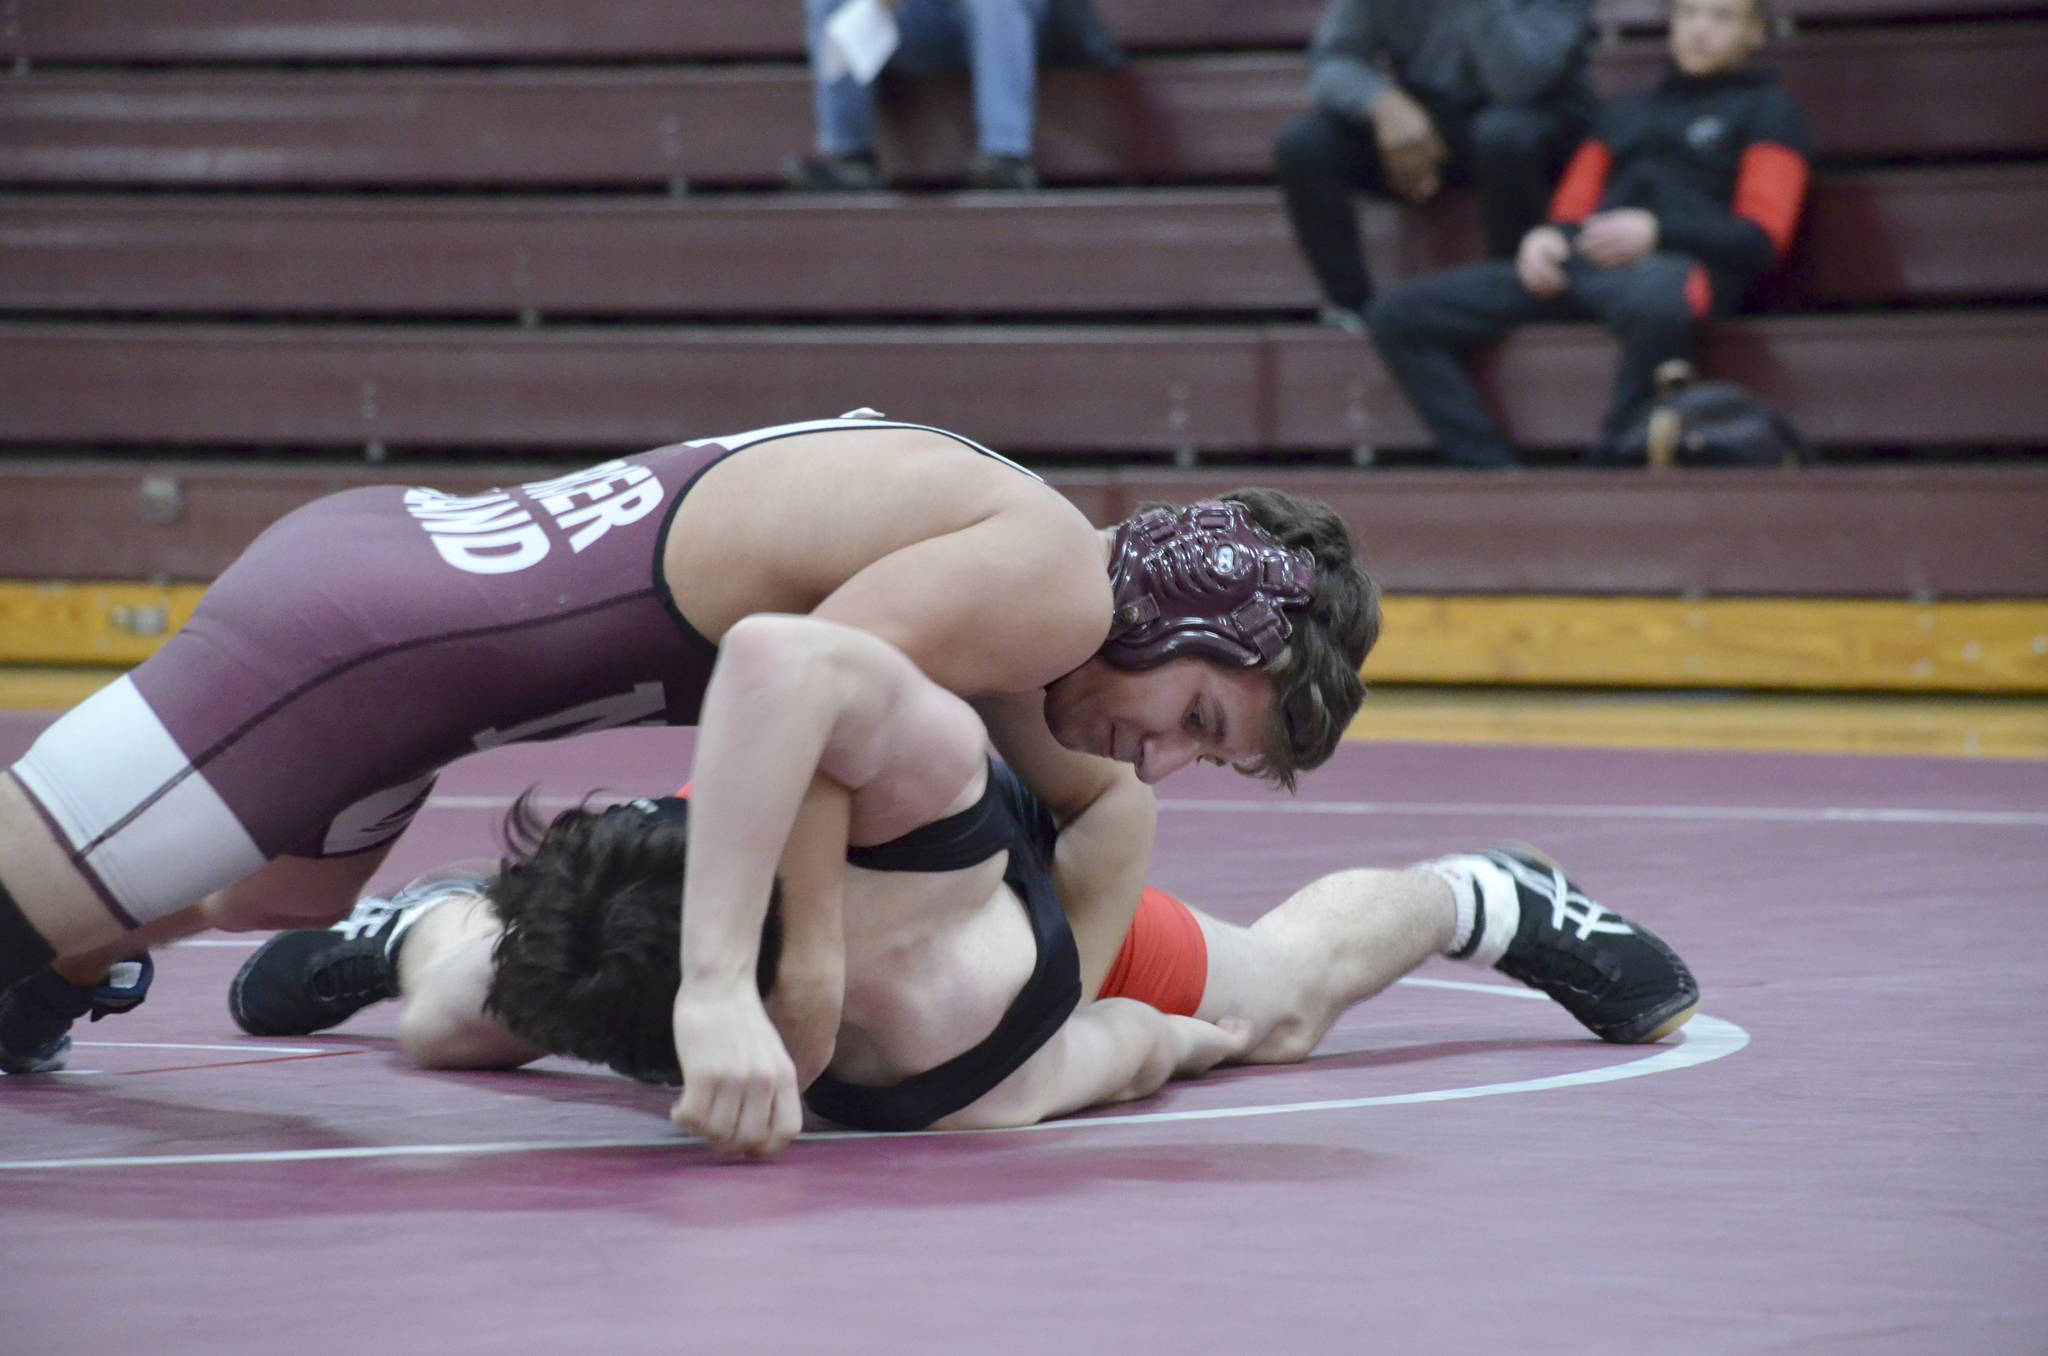 Photo courtesy of Billy Pruchno                                The Mercer Island Islanders wrestling squad cruised to a 48-0 victory against the Sammamish Totems on Jan. 5. Mercer Island 126-pounder Jordan Tillinger (pictured) pinned his opponent in the third round. Eli Pruchno (138), Vinny Ricci (152), and Rina Li (120) registered pins in their respective matches. Jonah Andrews (160), Liam Farrell (170), Donnie Howard (182) and Owen Babeler (195) won by forfeit.